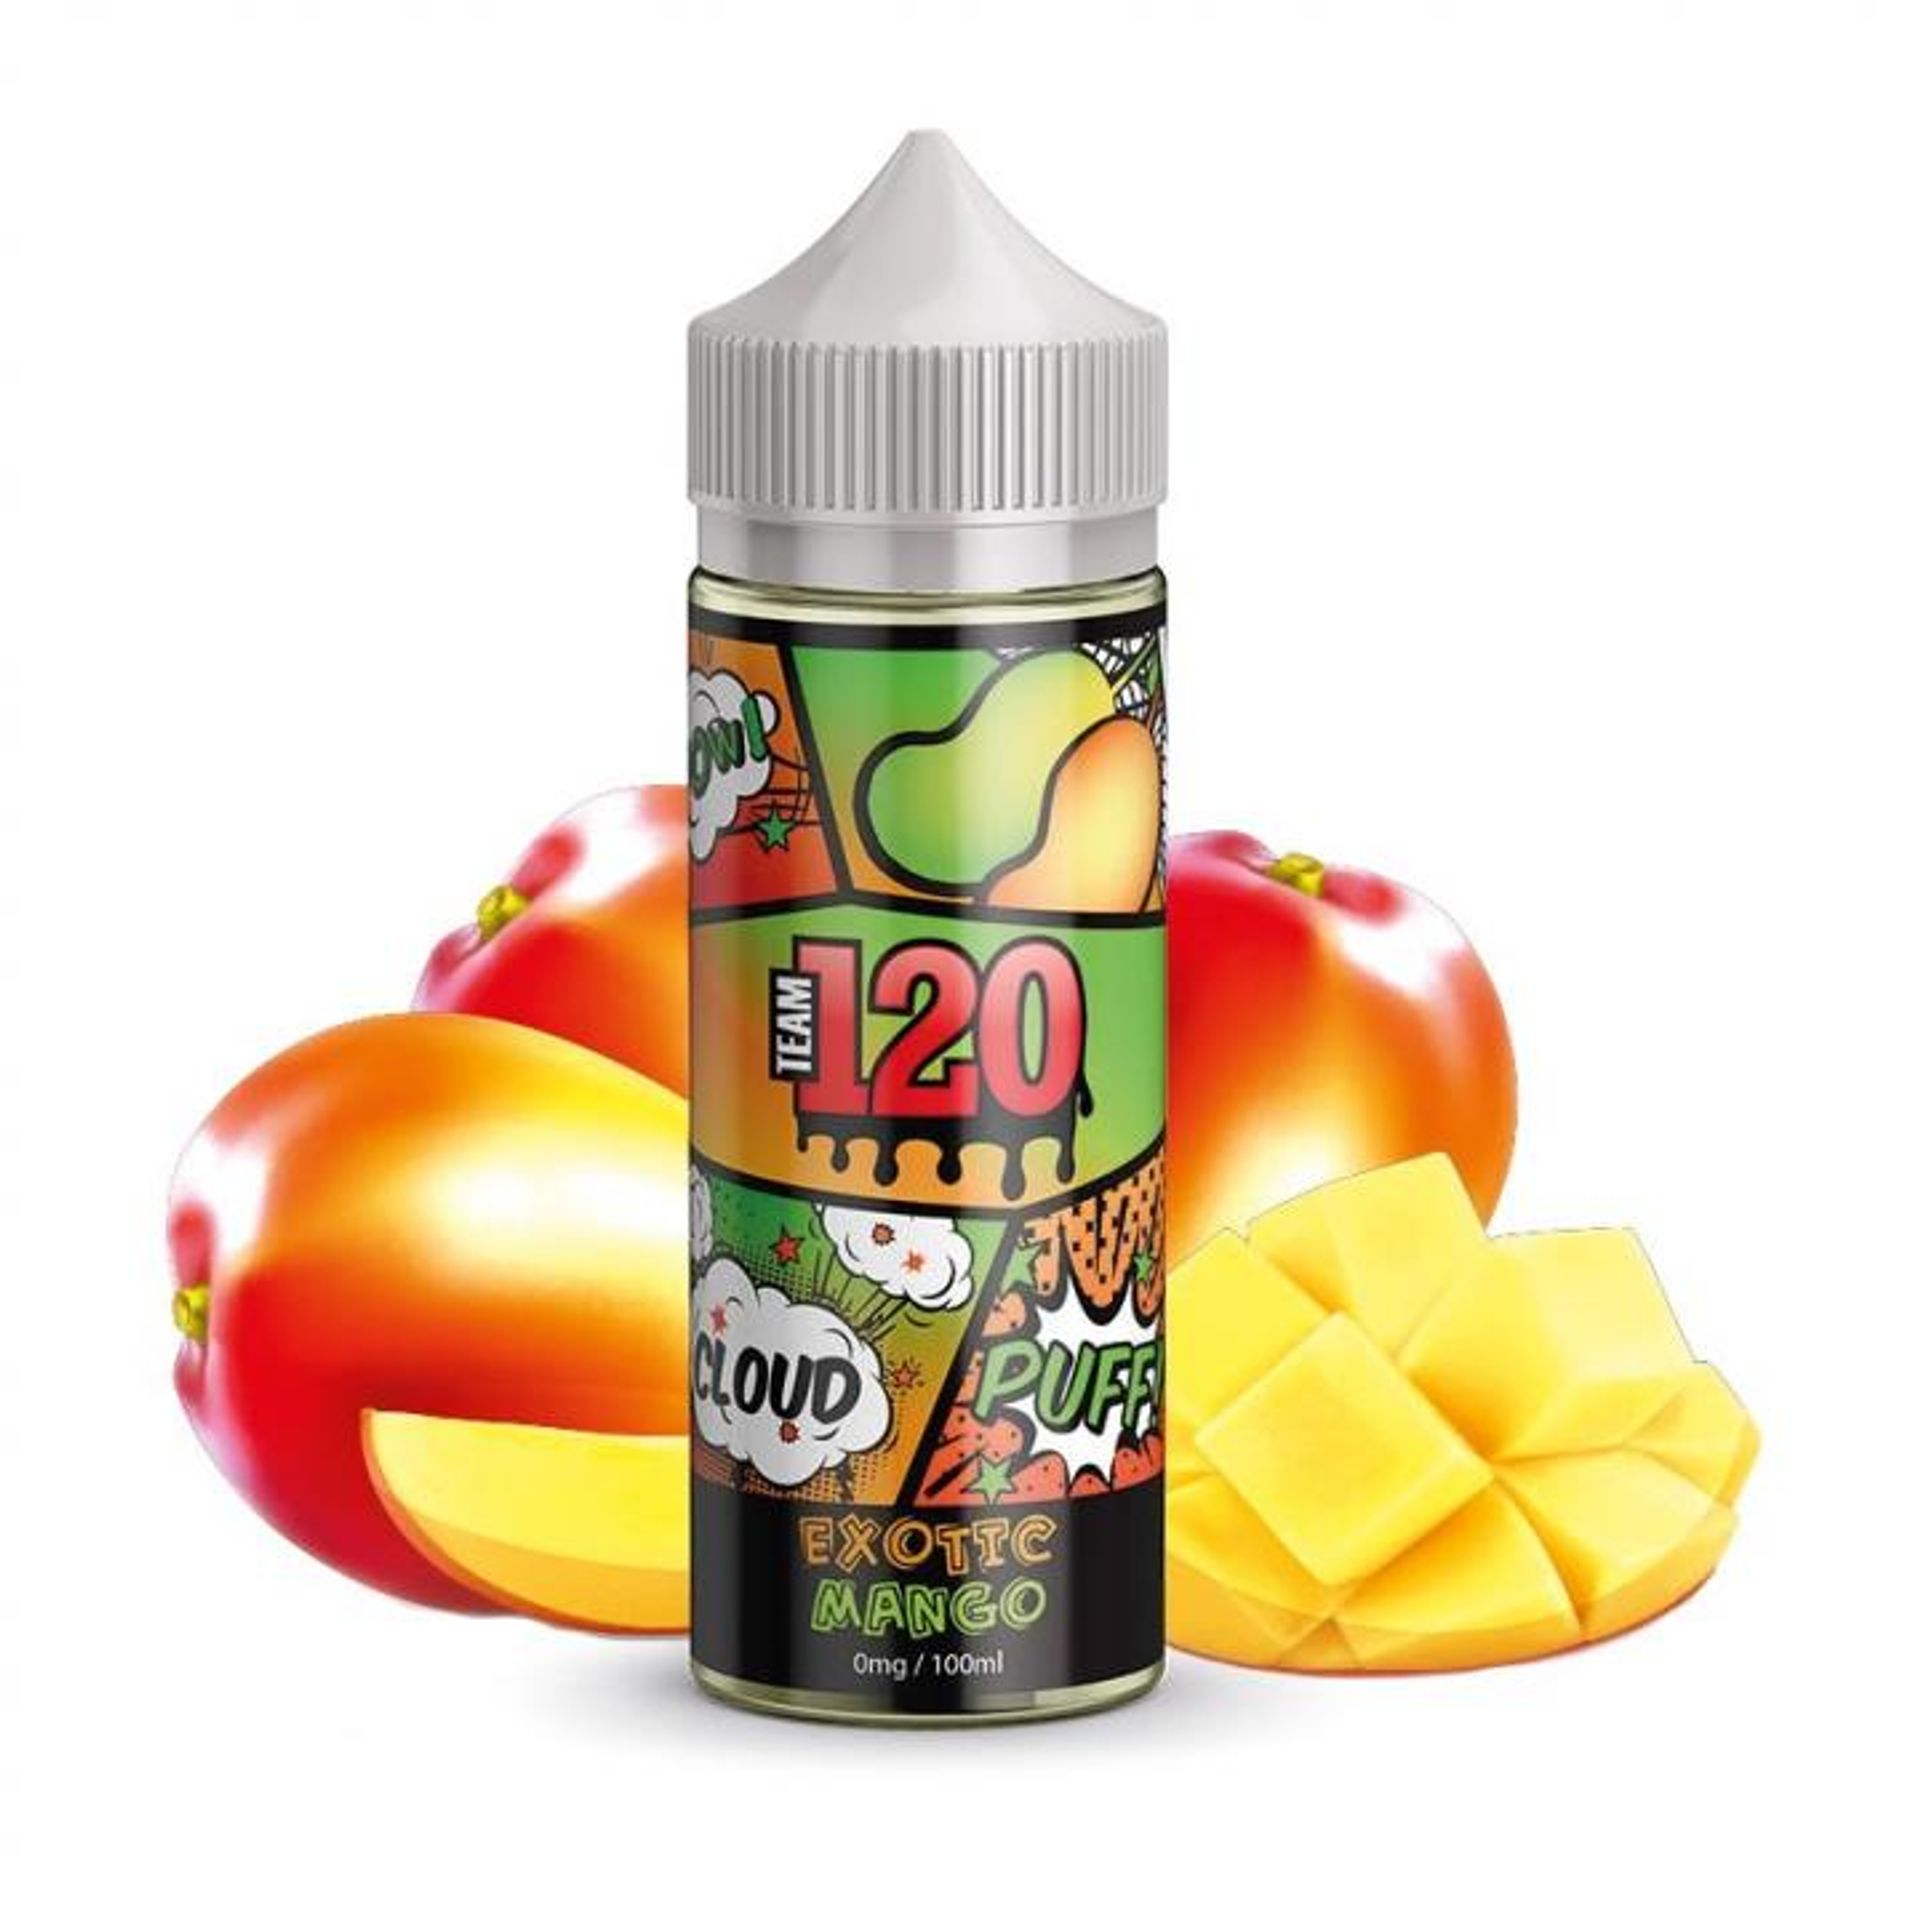 Image of Exotic Mango by Team120